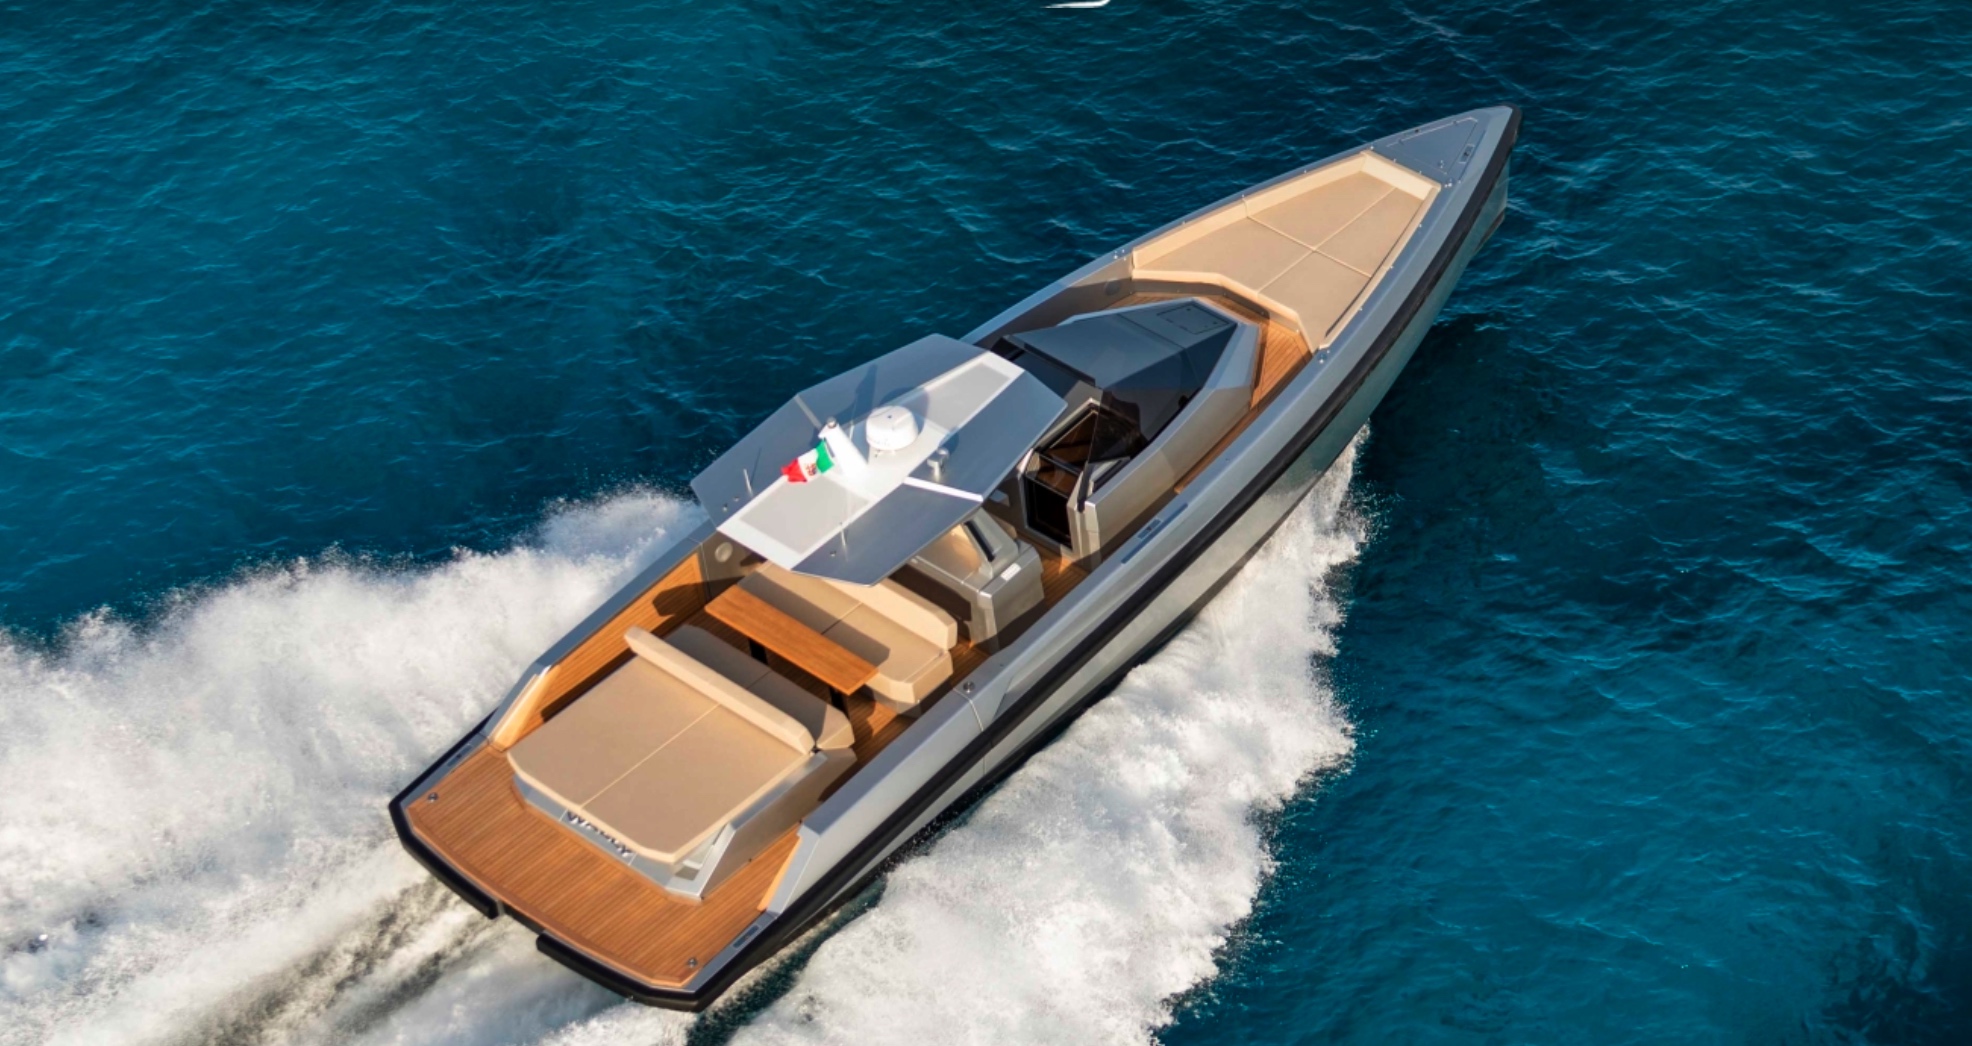 The 48 Wallytender Made Its US Debut At The 2019 Fort Lauderdale Int’l Boat Show